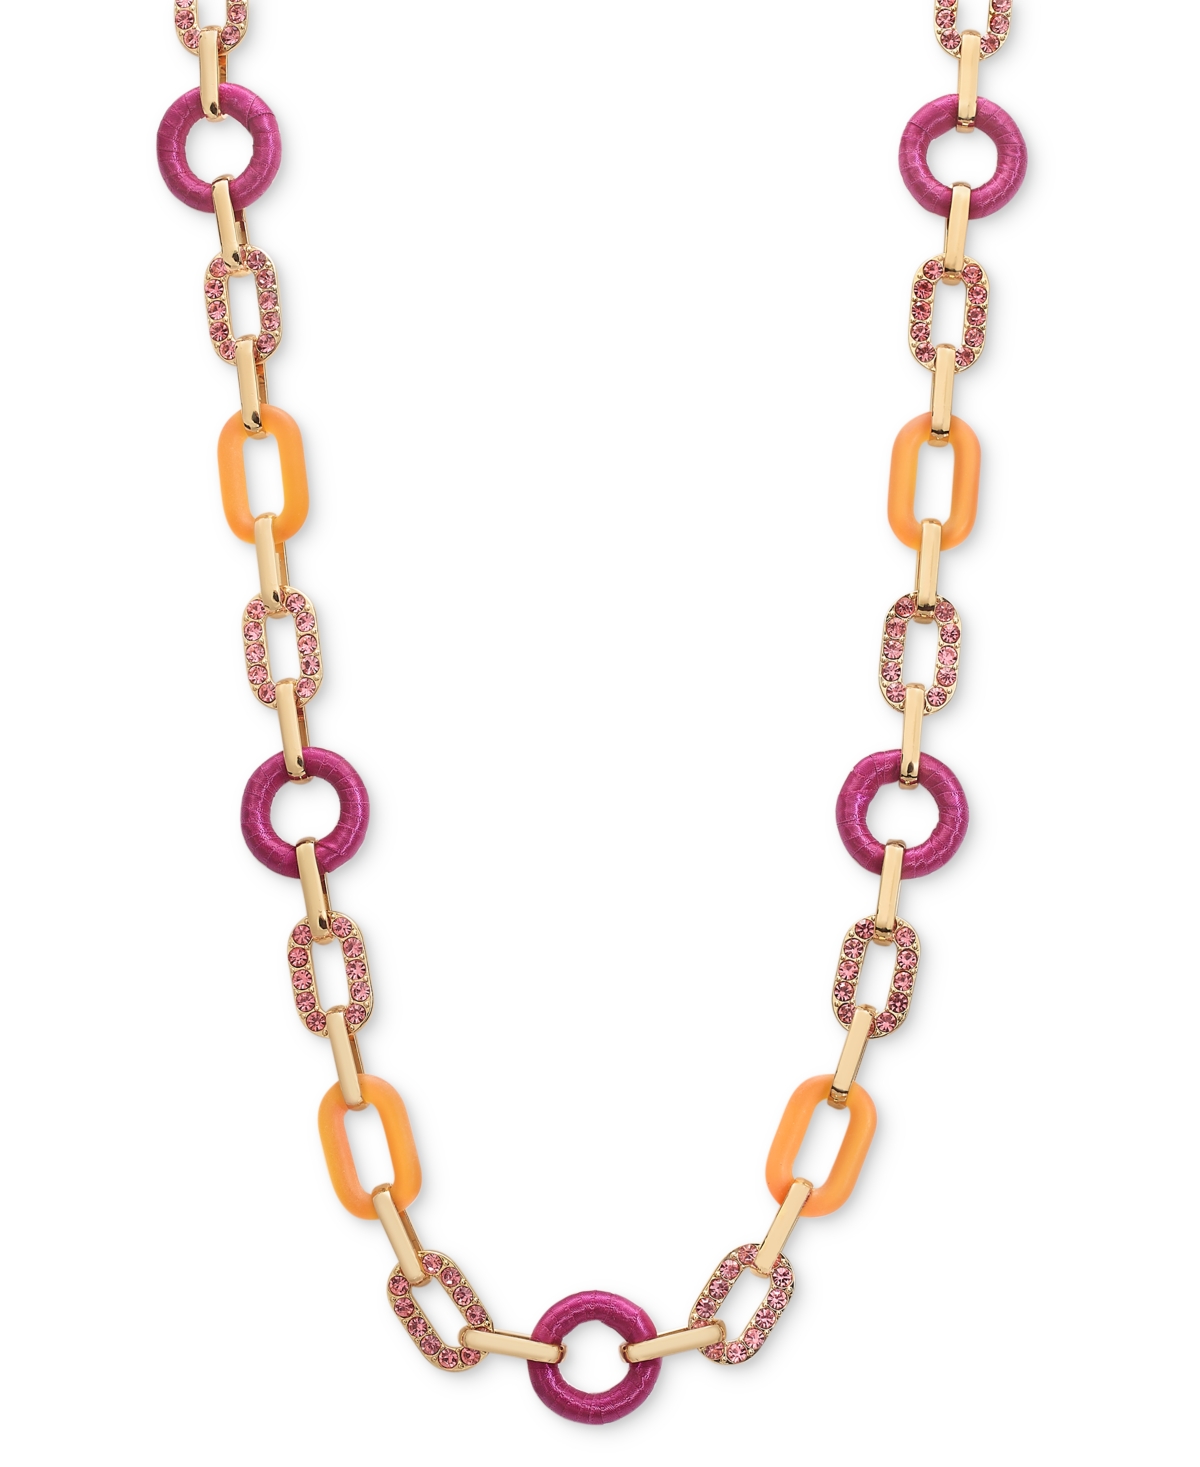 Gold-Tone Pave, Color & Ribbon-Wrapped Chain Link Strand Necklace, 42" + 3" extender, Created for Macy's - Pink